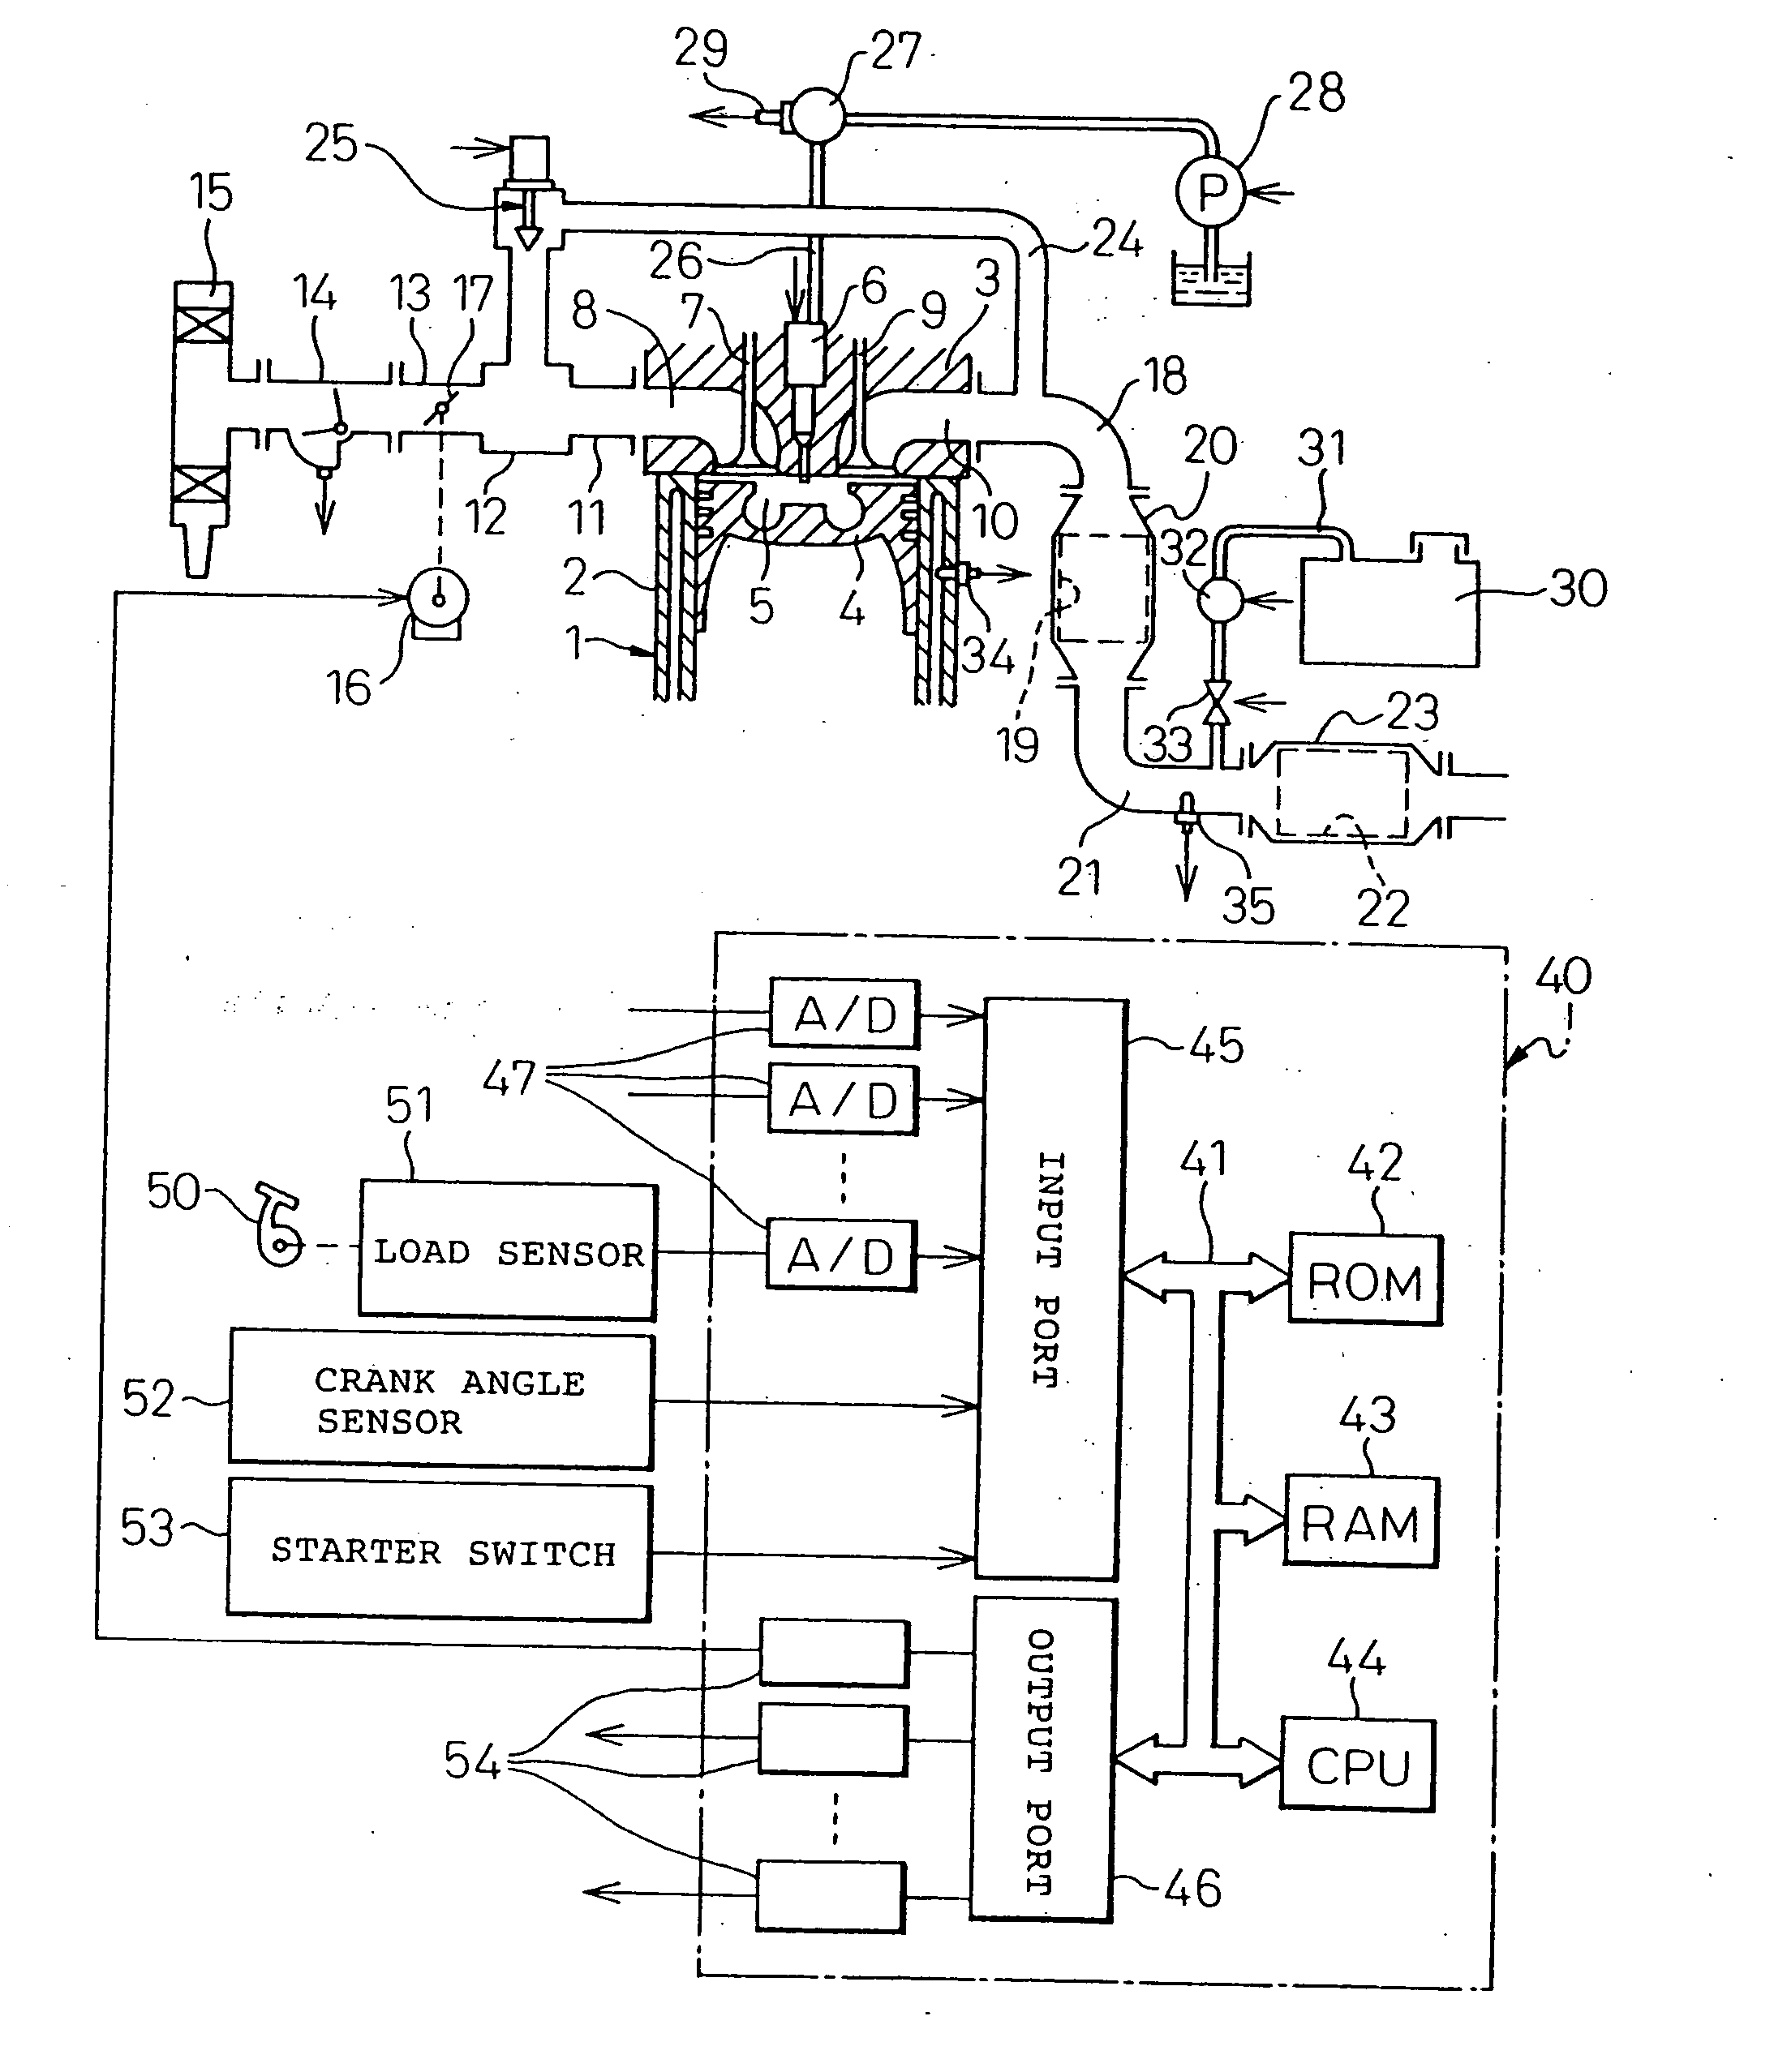 Exhaust gas purification device of internal combustion engine